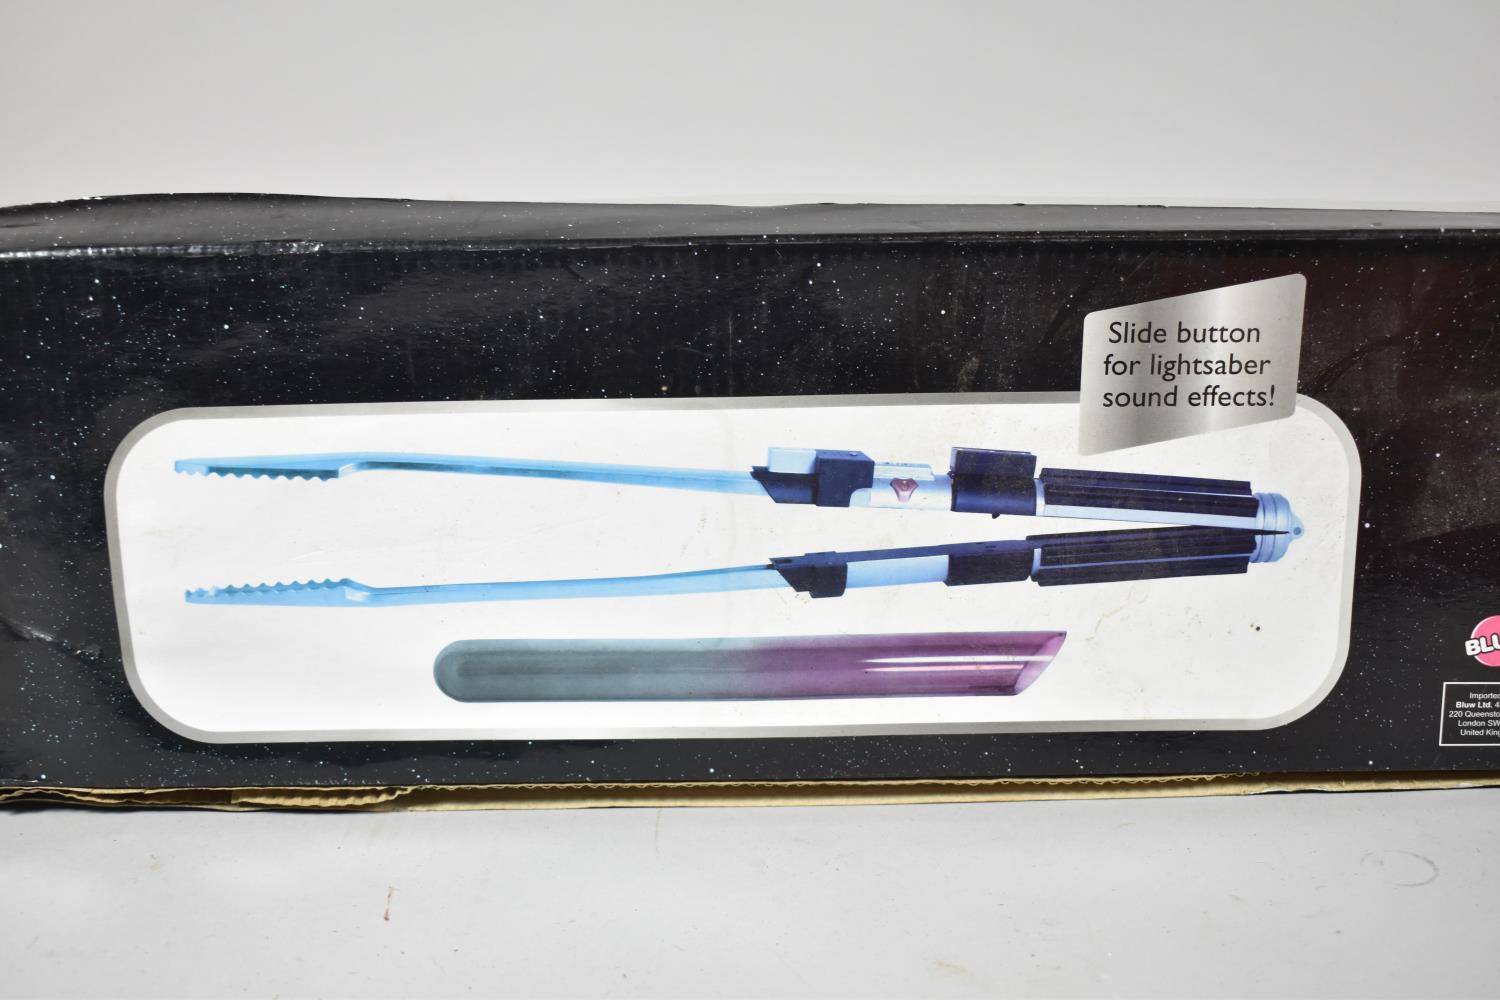 A Cased Set of Star Wars Lightsaber BBQ Tongs in Original Box - Image 3 of 3